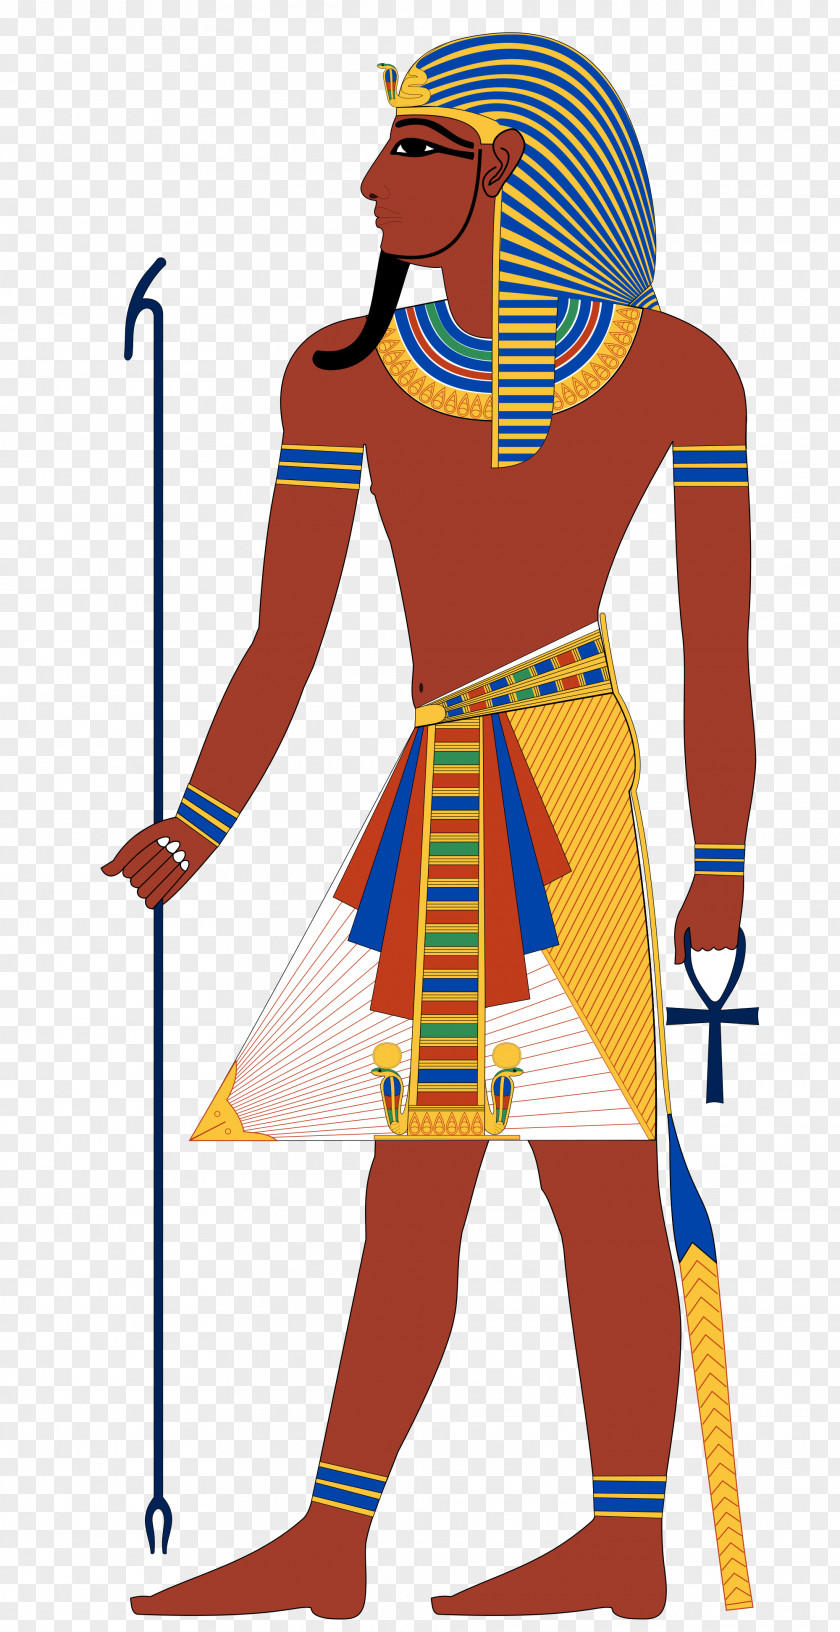 Pyramid Builder Cliparts Ancient Egypt New Kingdom Of Tutankhamun Early Dynastic Period PNG